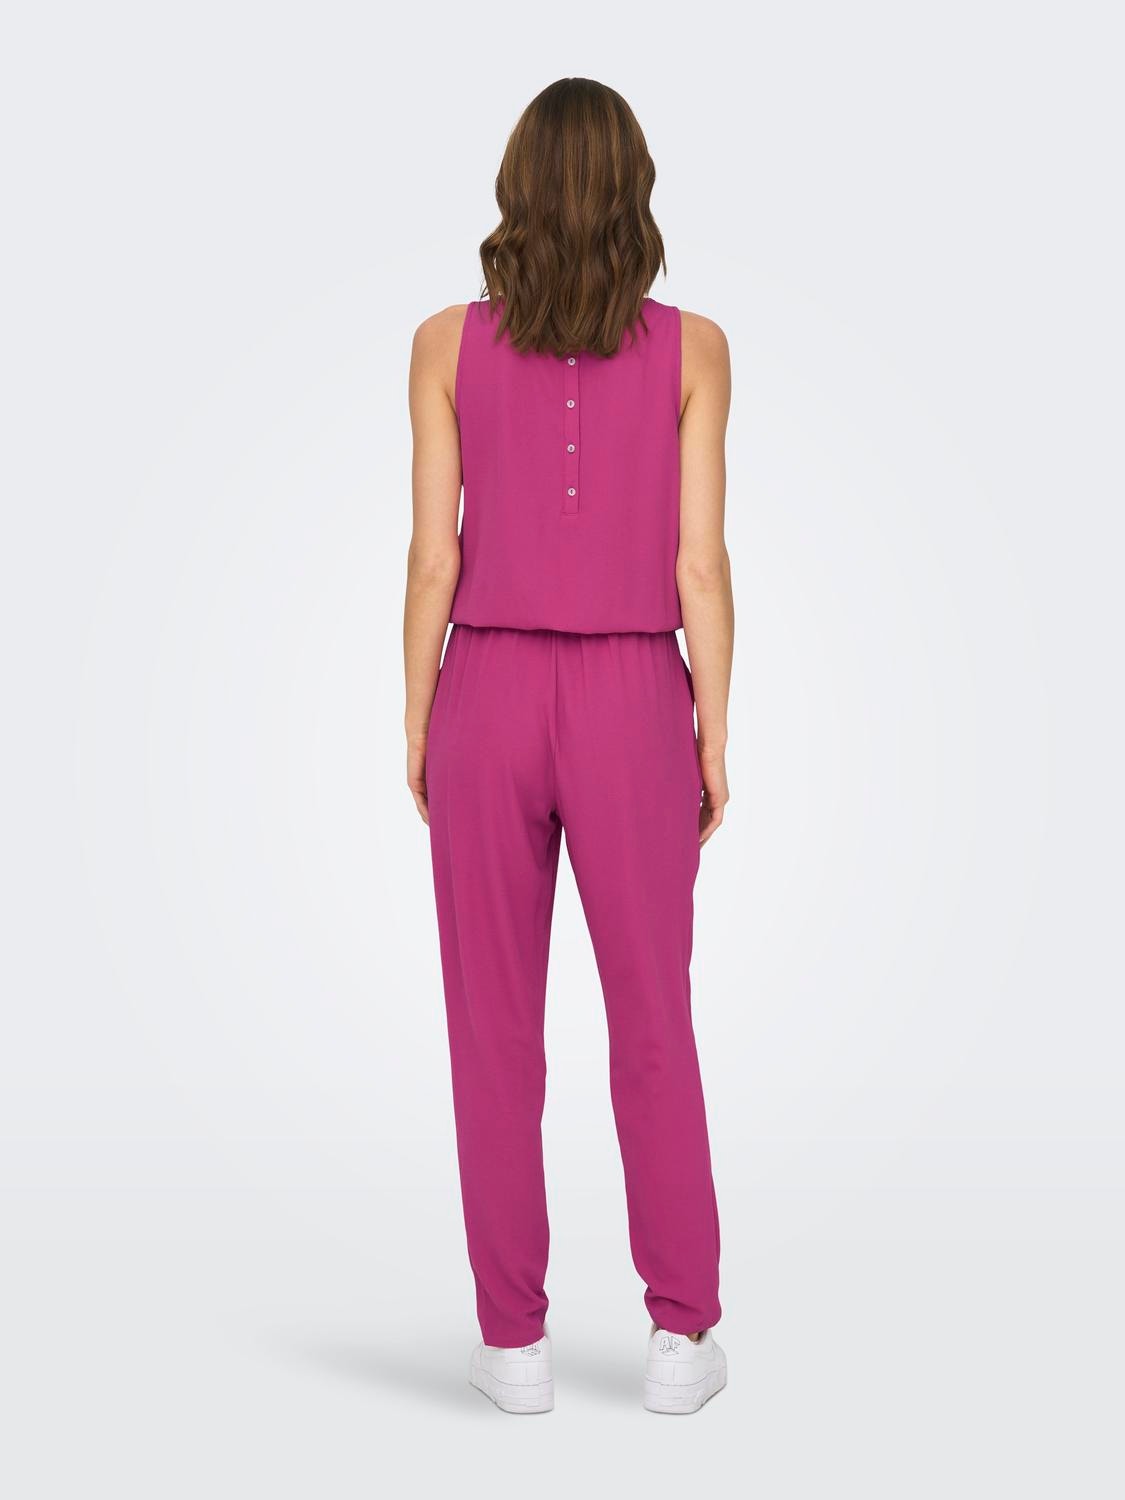 ONLY Mid waist Jumpsuit -Very Berry - 15236581